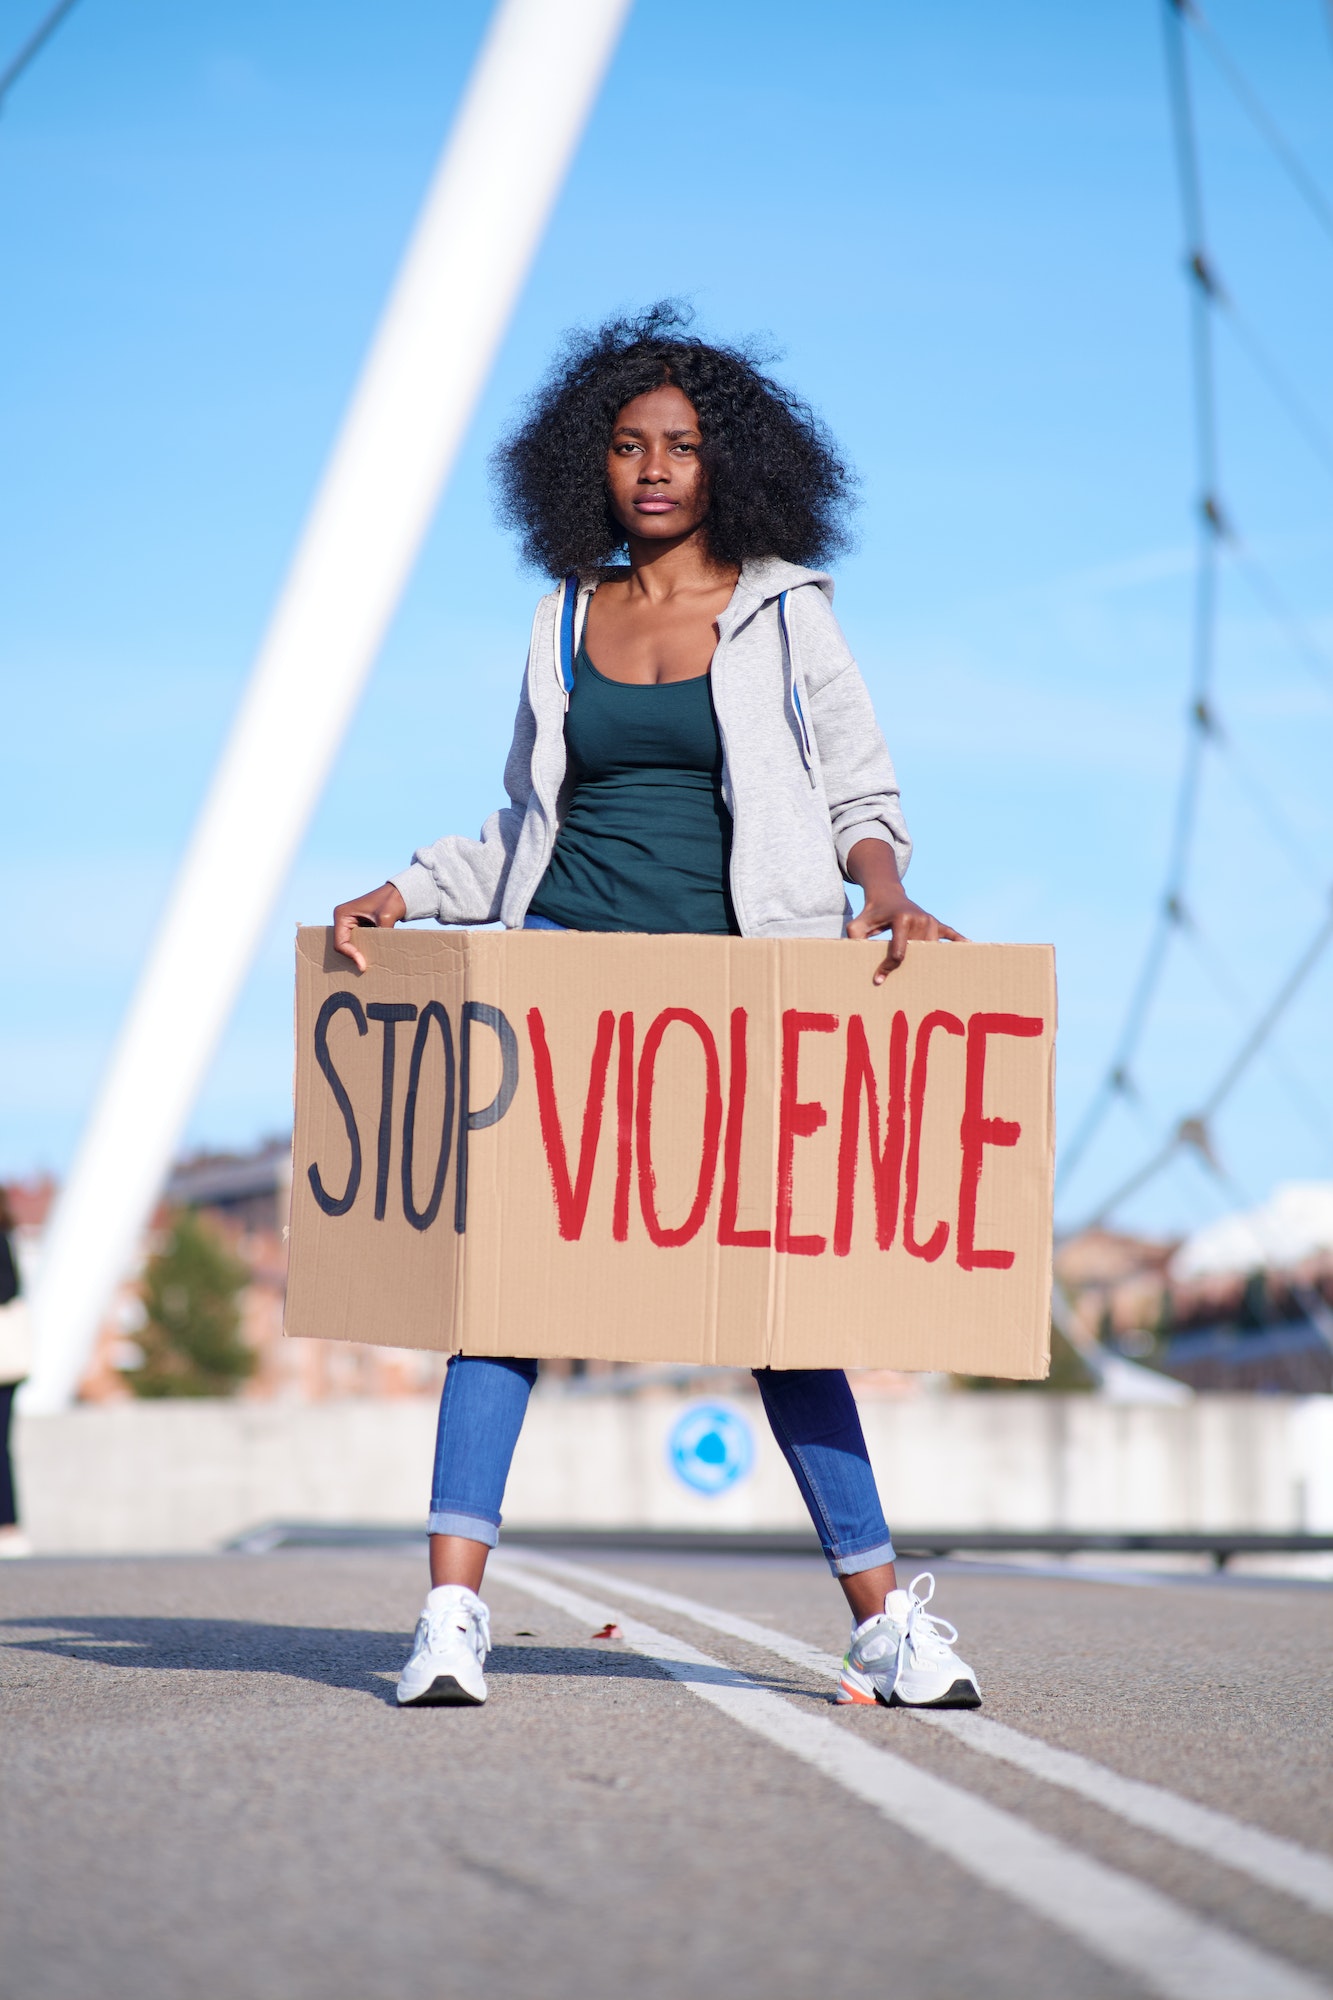 A young African-American protester holding a banner and protesting against violence against women.